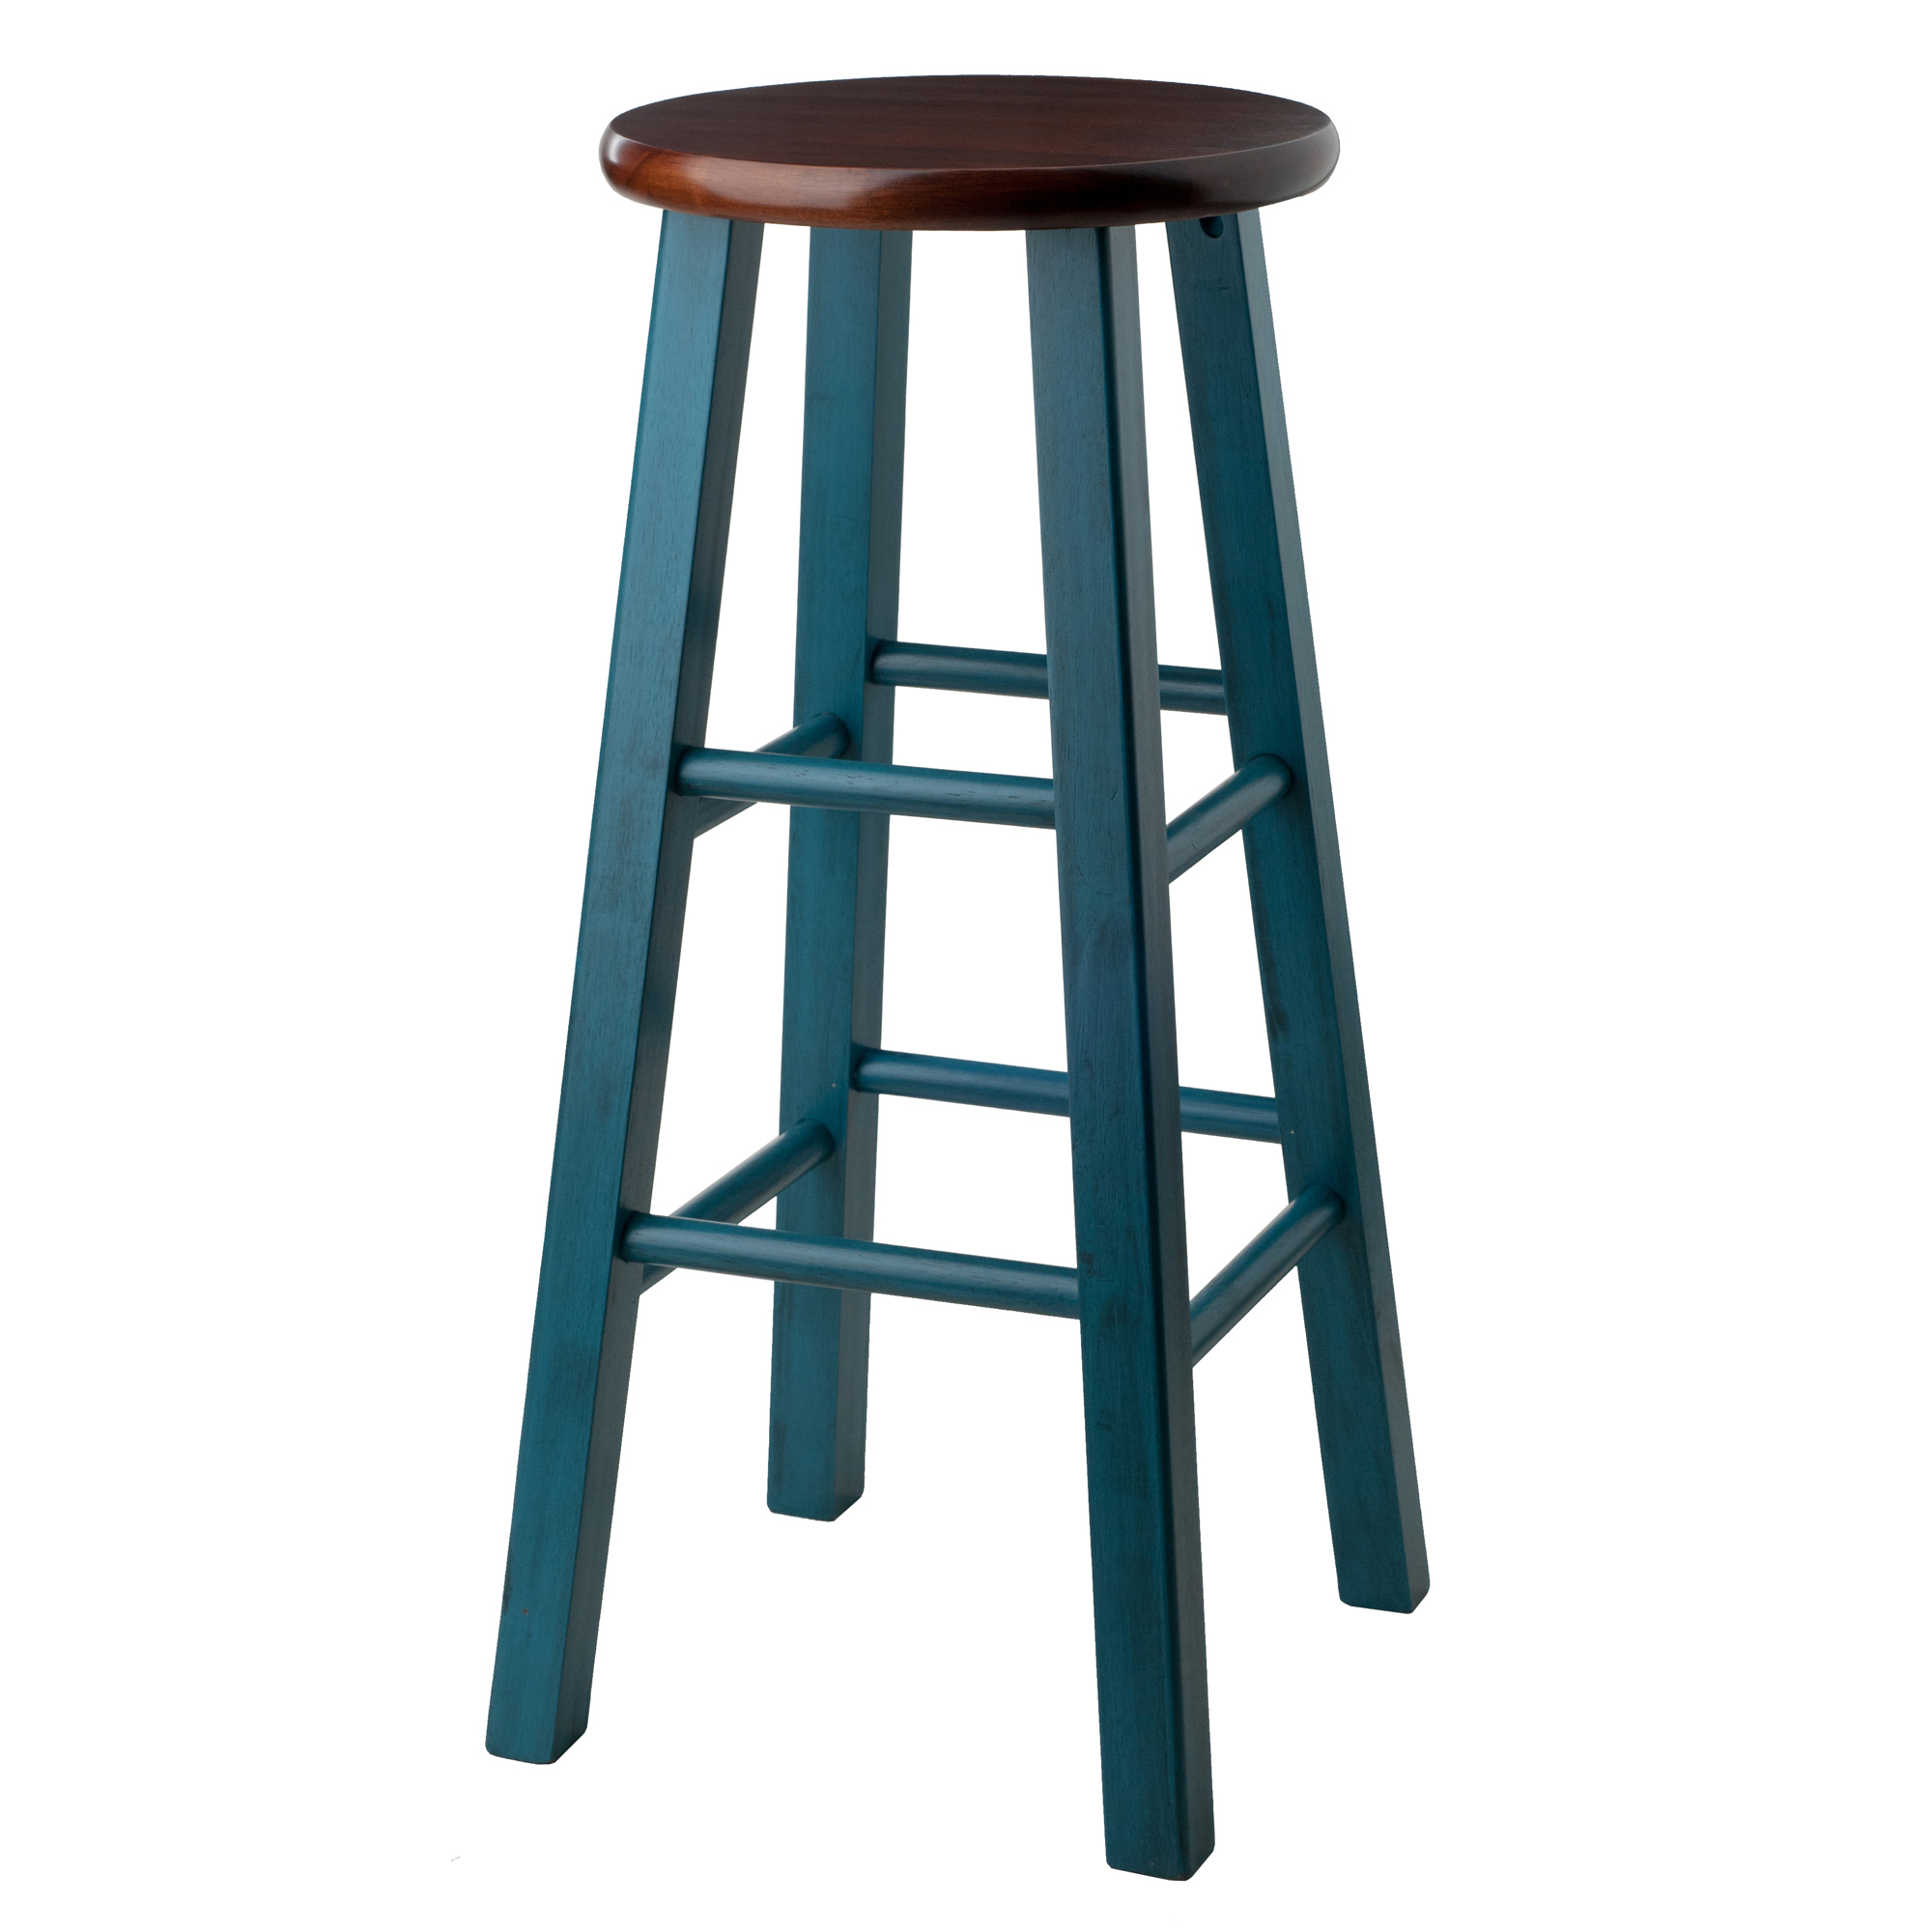 Winsome Wood Ivy 29" Bar Stool, Rustic Teal & Walnut Finish - image 1 of 5